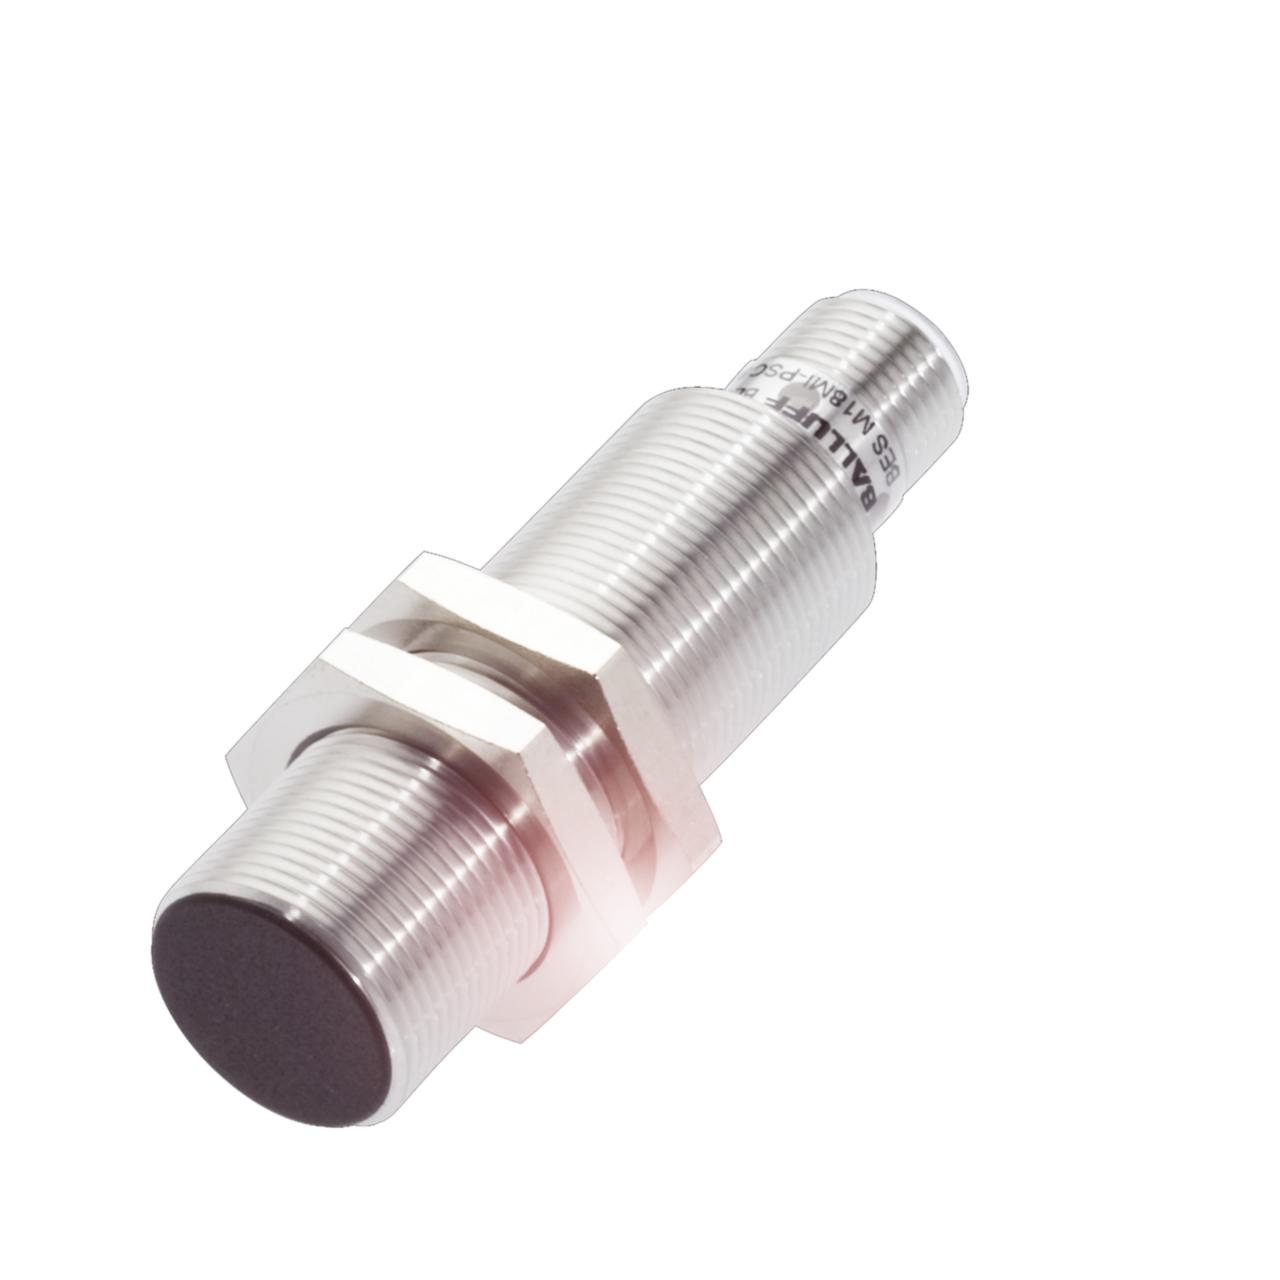 BES008L-BES M18MI-PSC80B-S04G Standard Inductive Sensors with Preferred Types